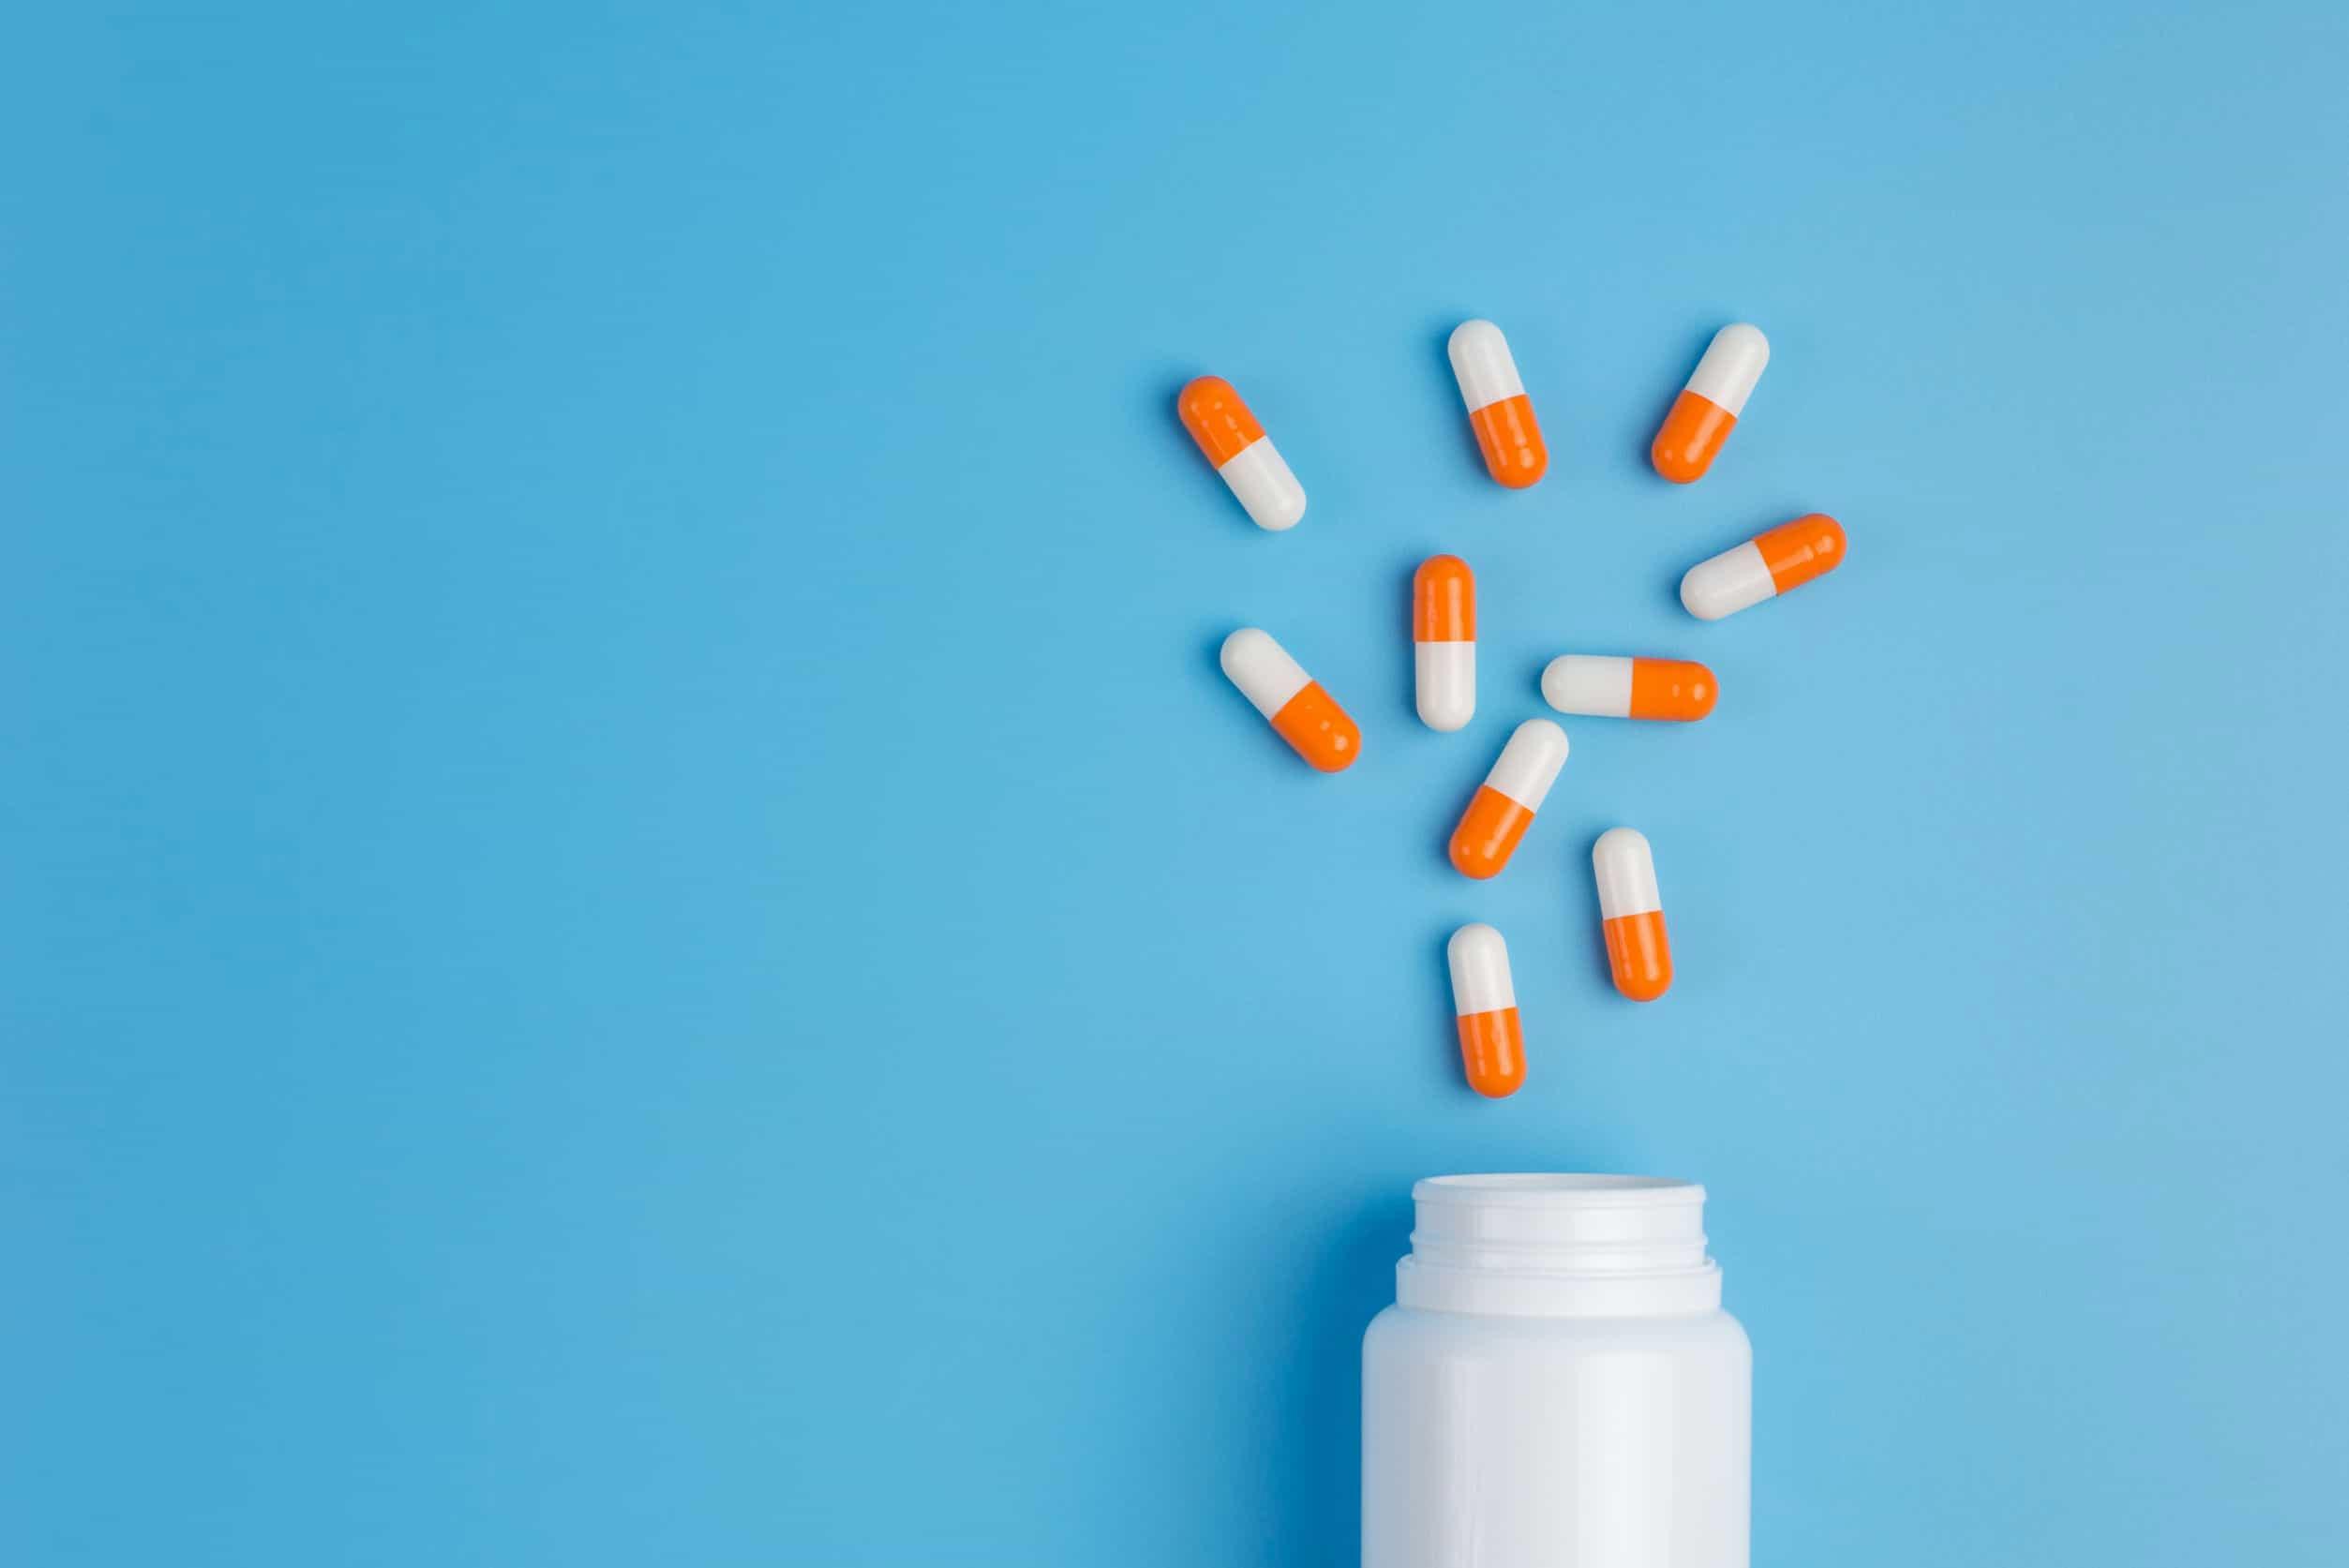 Orange and white pills spilled out of a white bottle on a blue background.